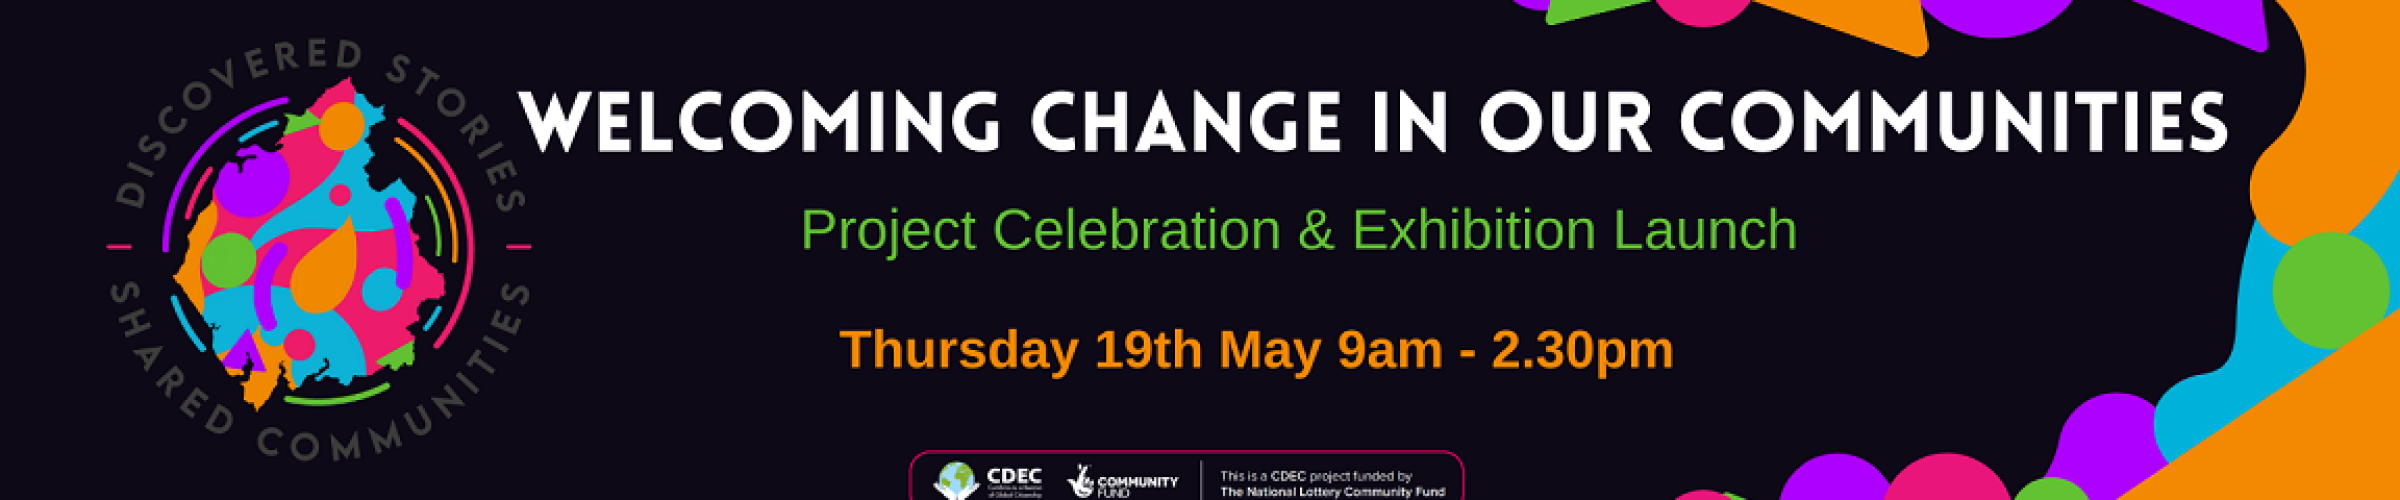 Discovered Stories, Shared Communities - Project Celebration & Exhibition Launch